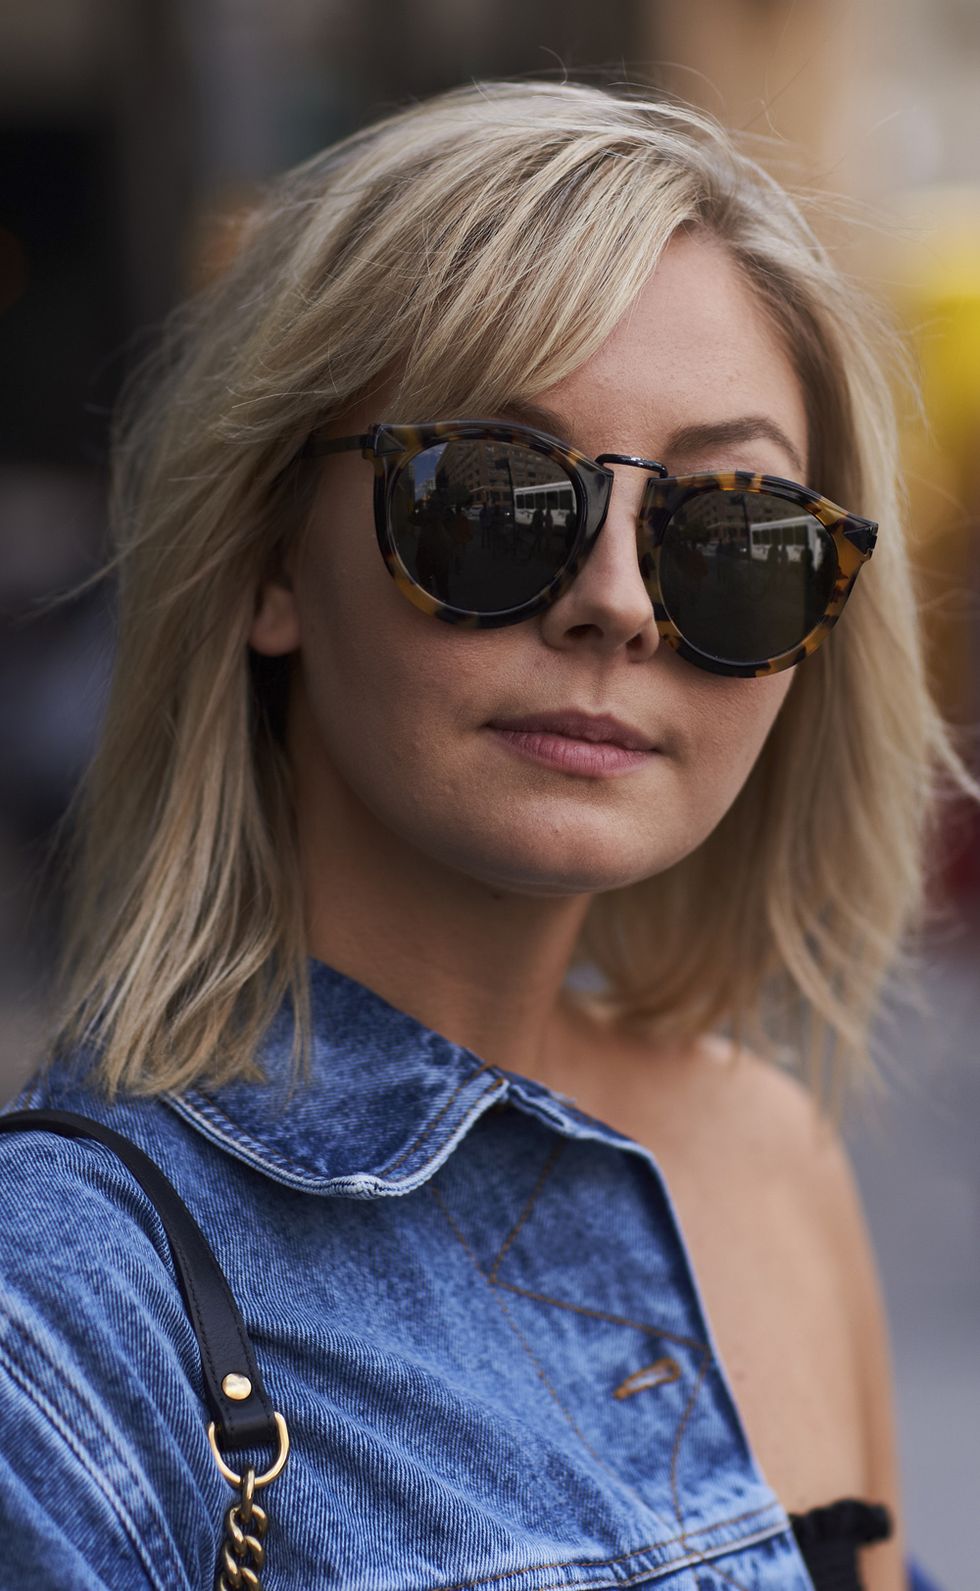 Eyewear, Sunglasses, Hair, Face, Cool, Blond, Hairstyle, Glasses, Street fashion, Beauty, 